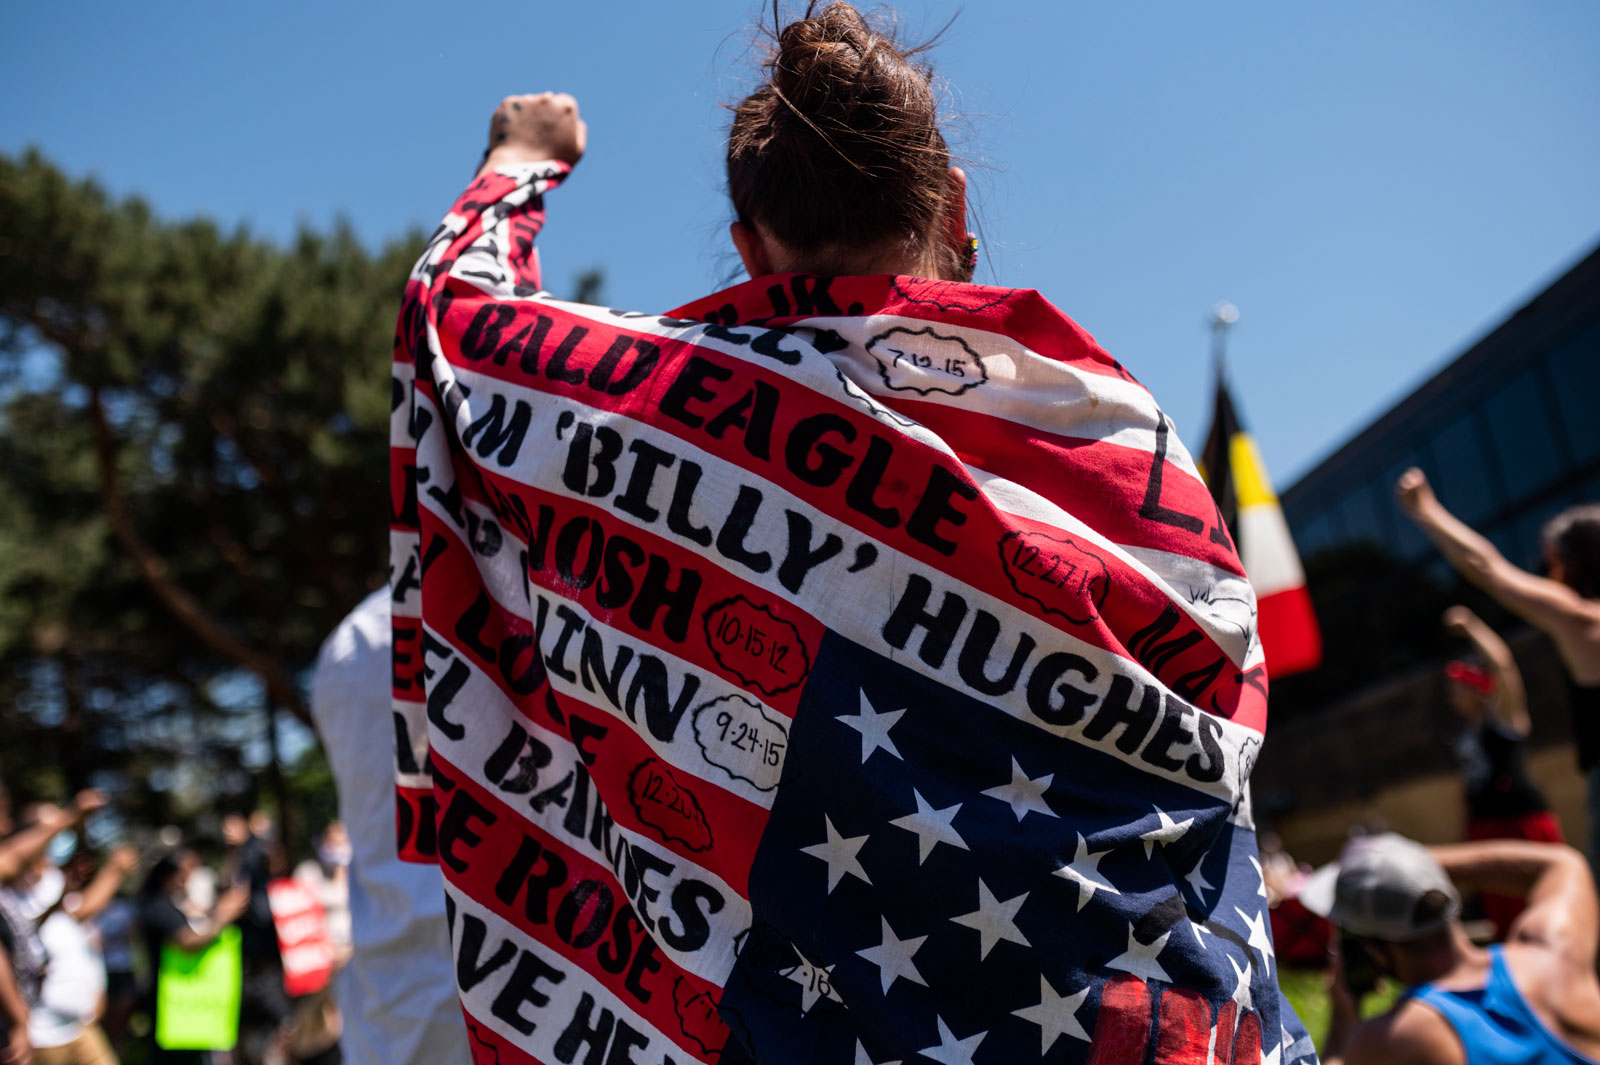 A woman draped in a flag with the names of Native American people who have been killed, at a demonstration outside the American Indian Center, Minneapolis, Minnesota, June 7, 2020